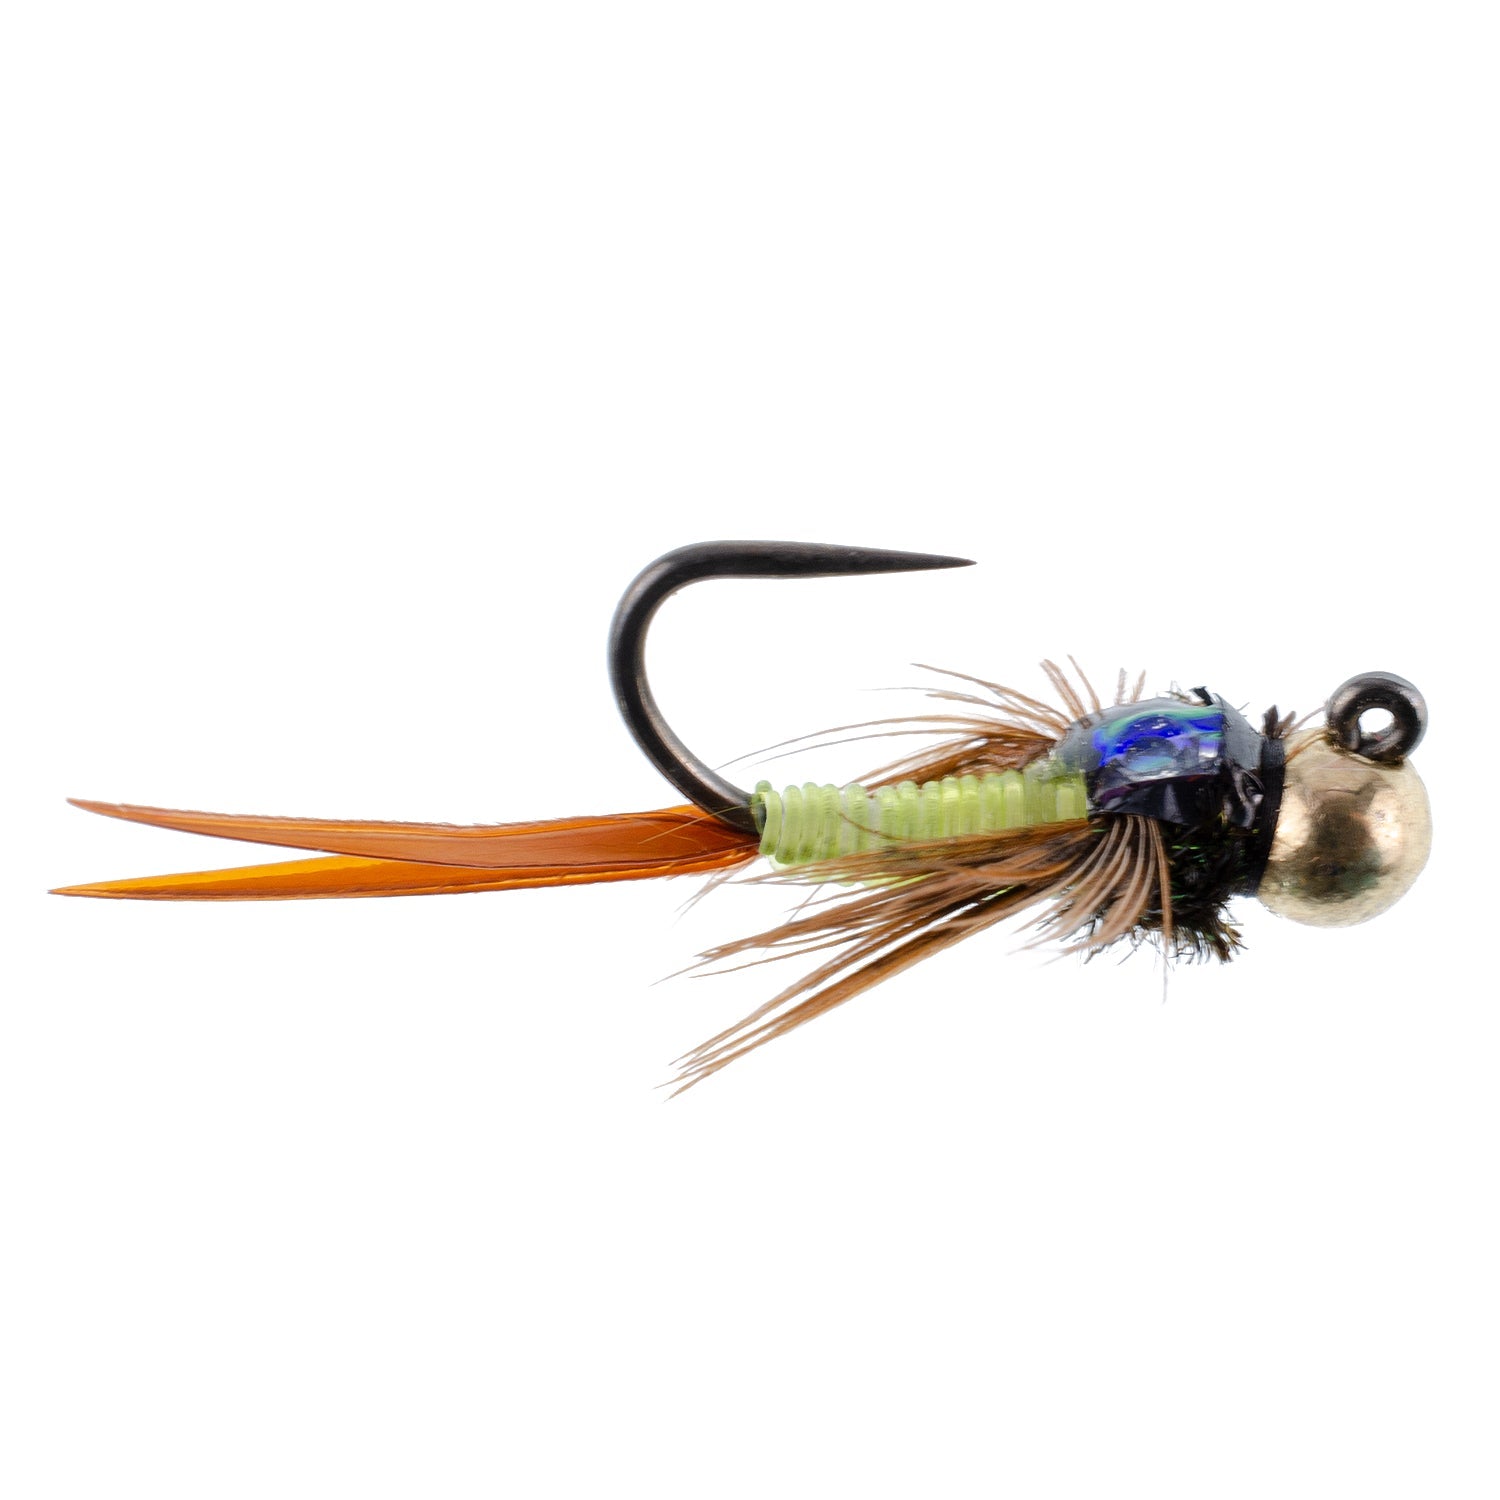 Tactical Tungsten Bead Head Copper John Euro Nymph Assortment Fly Fishing Flies - Collection of 9 Flies 3 Colors Hook Size 14